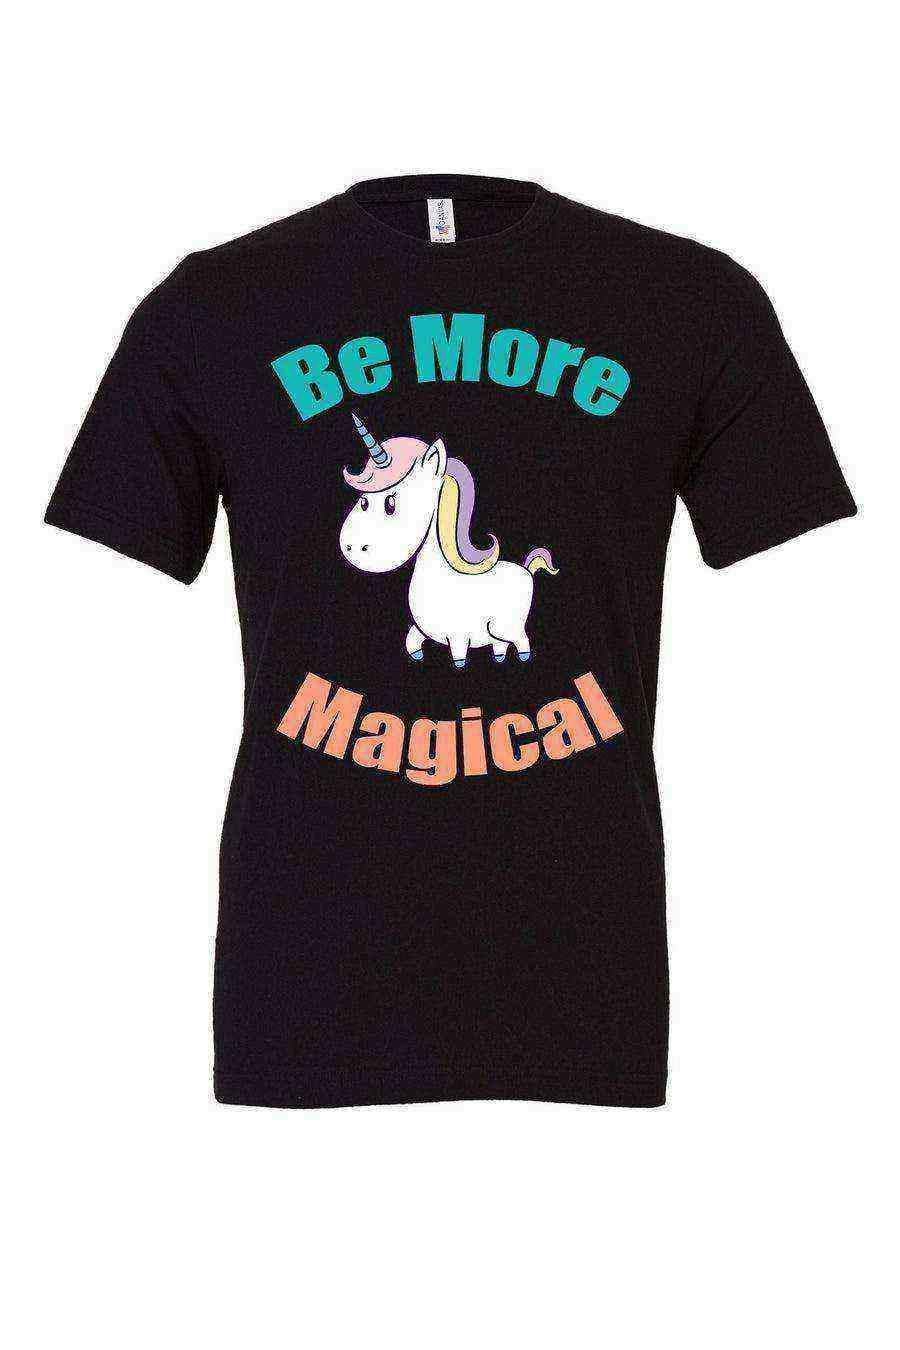 Toddler | Be More Magical Unisex Tee | Unicorn Shirt - Dylan's Tees